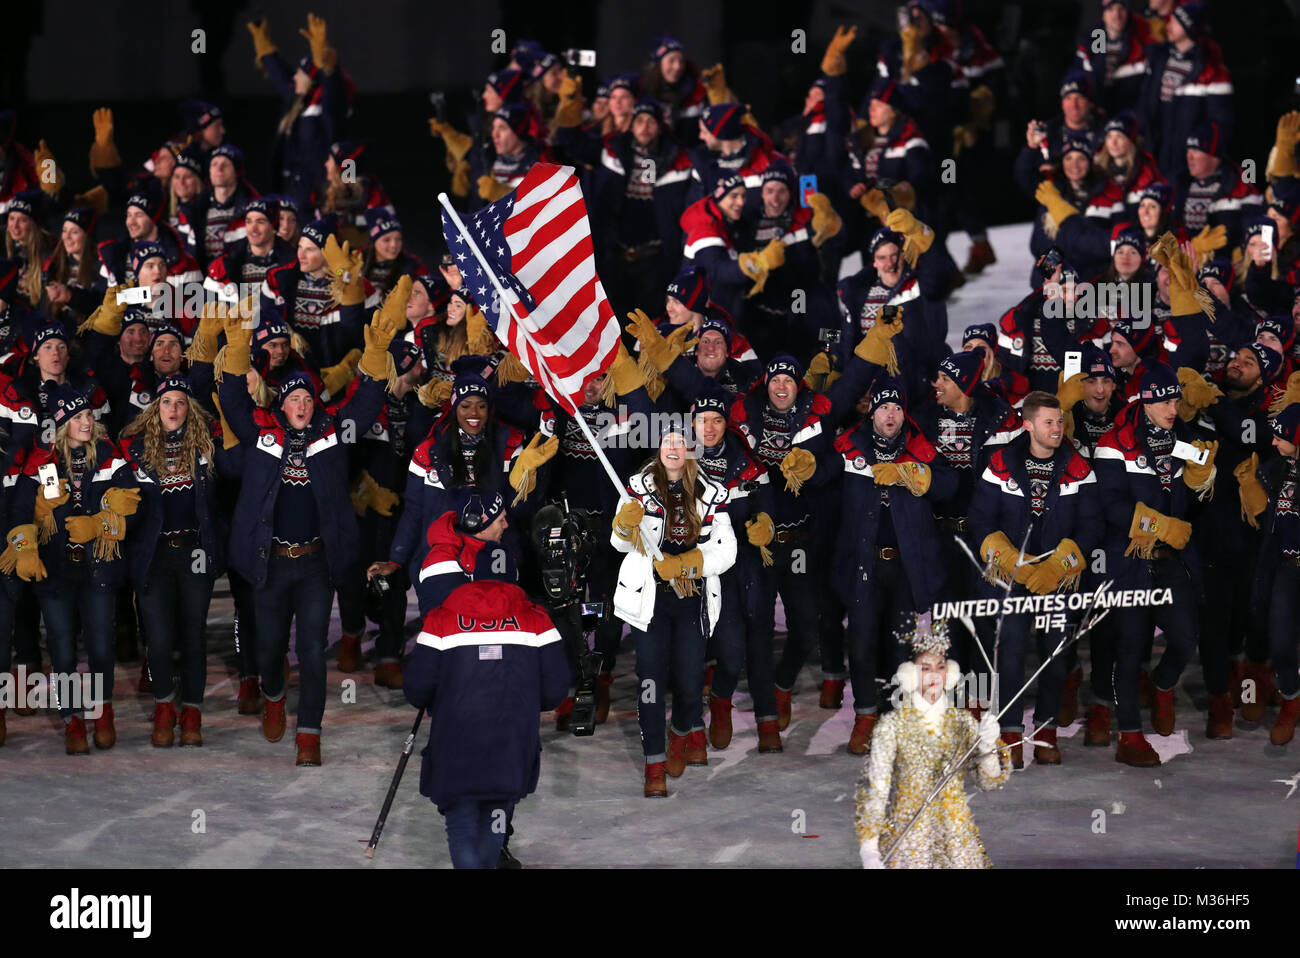 United States of America flag bearer Erin Hamlin leads out her team during the Opening Ceremony of the PyeongChang 2018 Winter Olympic Games at the PyeongChang Olympic Stadium in South Korea. Stock Photo